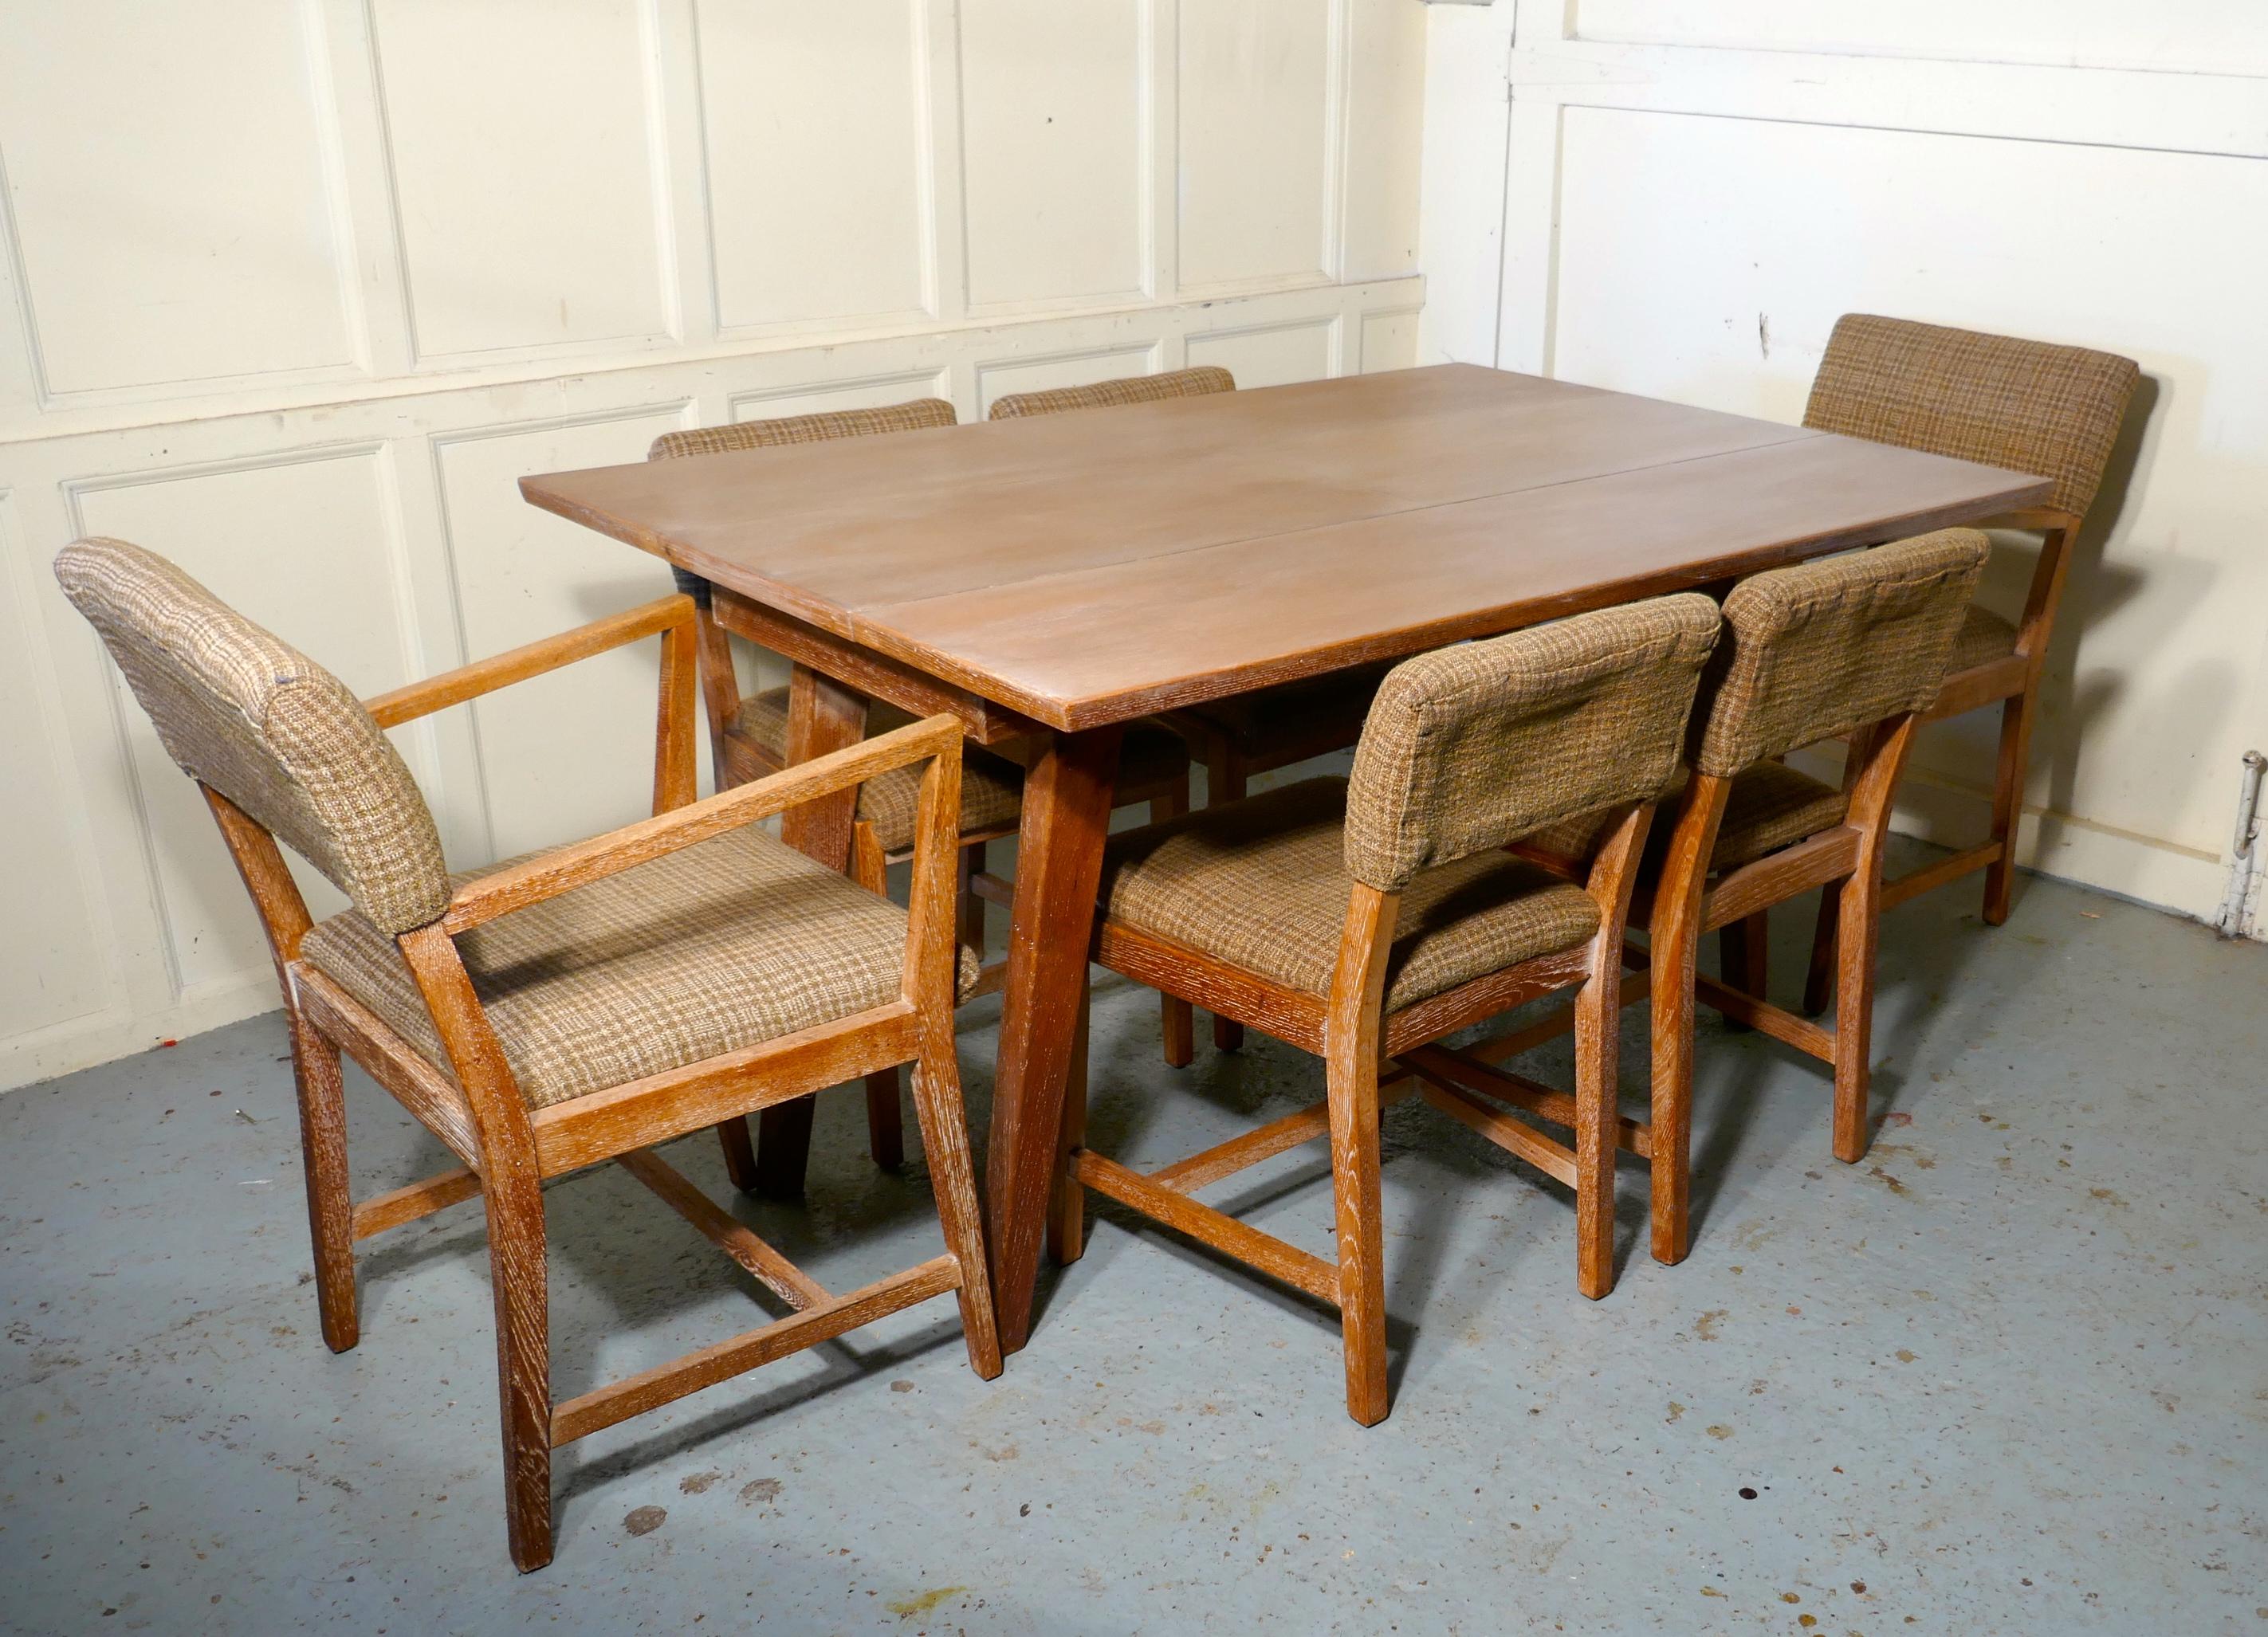 Limed Oak Extending Dining Table and set of 6 Chairs

A very rare set, the splay legged table pulls apart in the centre allowing a centre leaf to pop up making a small narrow table into large 6 seater dining table
The set is in limed oak, it is in